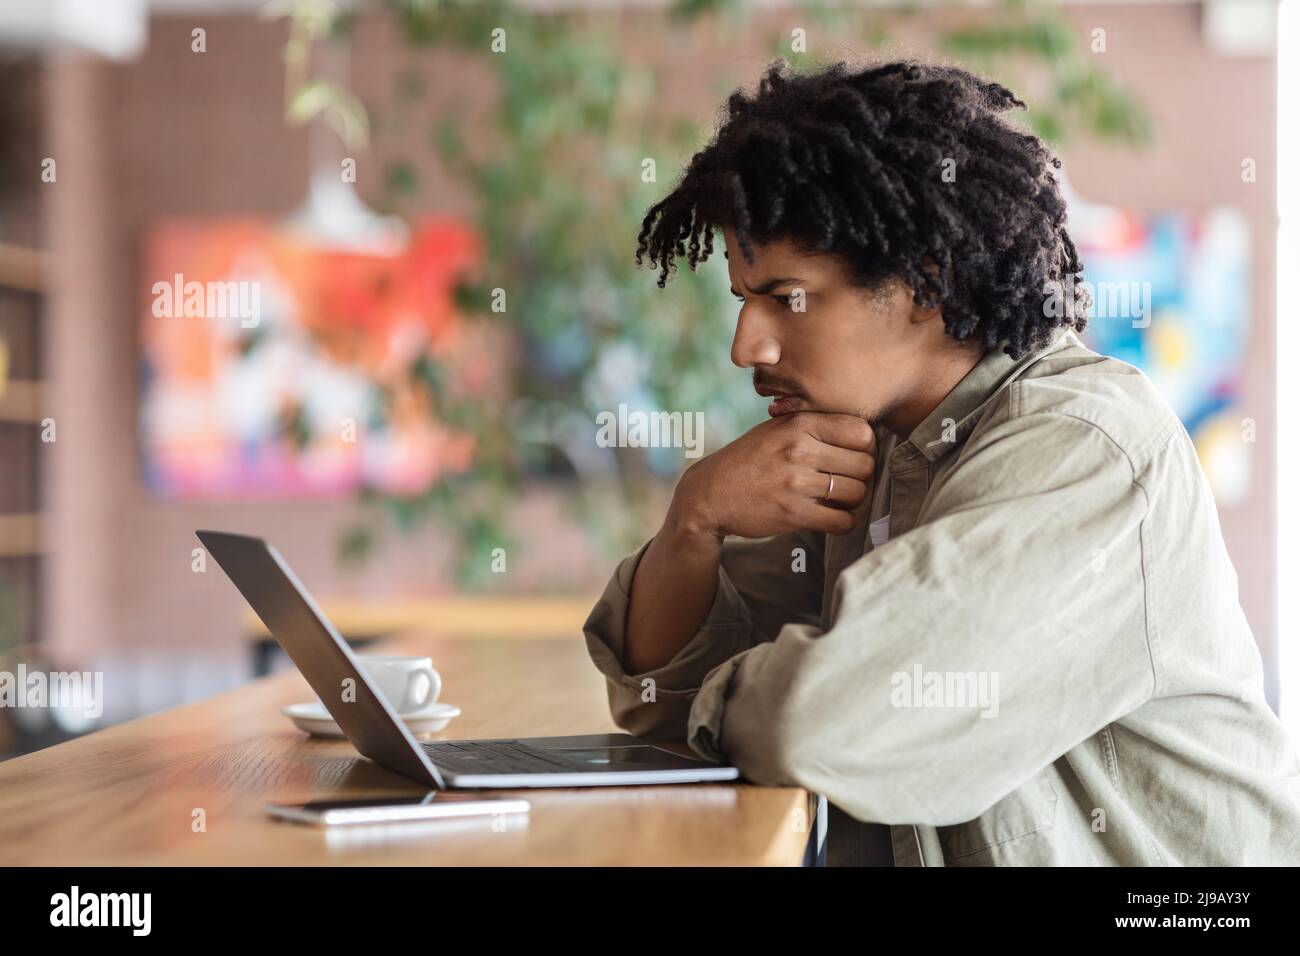 Pensive curly young black man looks at laptop screen at table in cafe interior Stock Photo